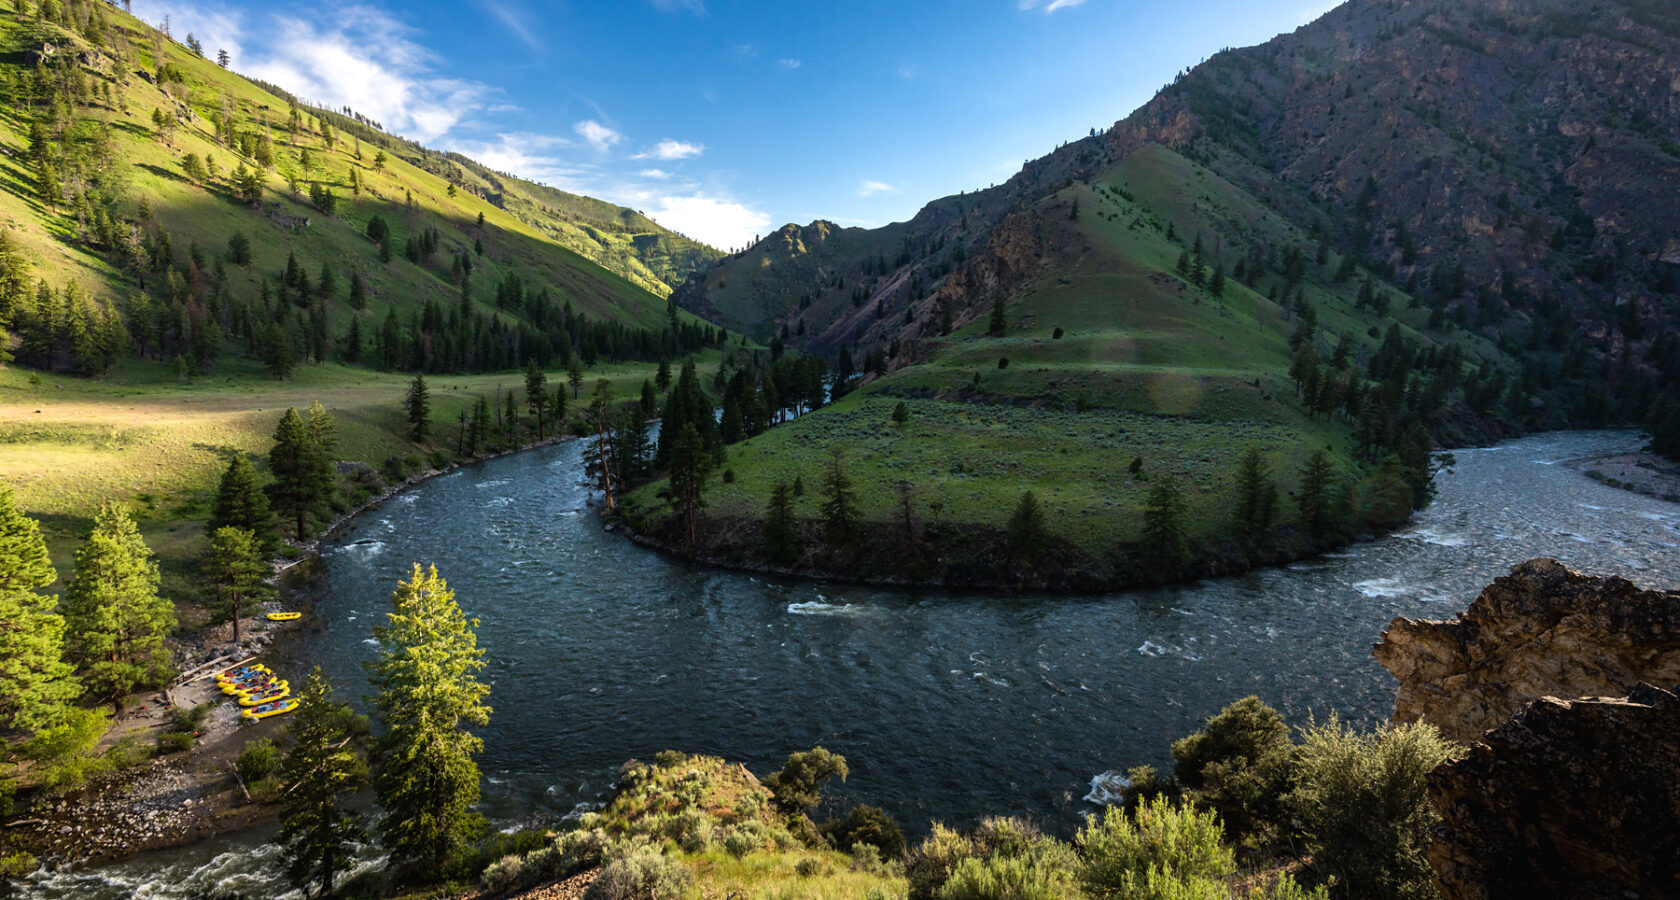 Idaho's Middle Fork of the Salmon River